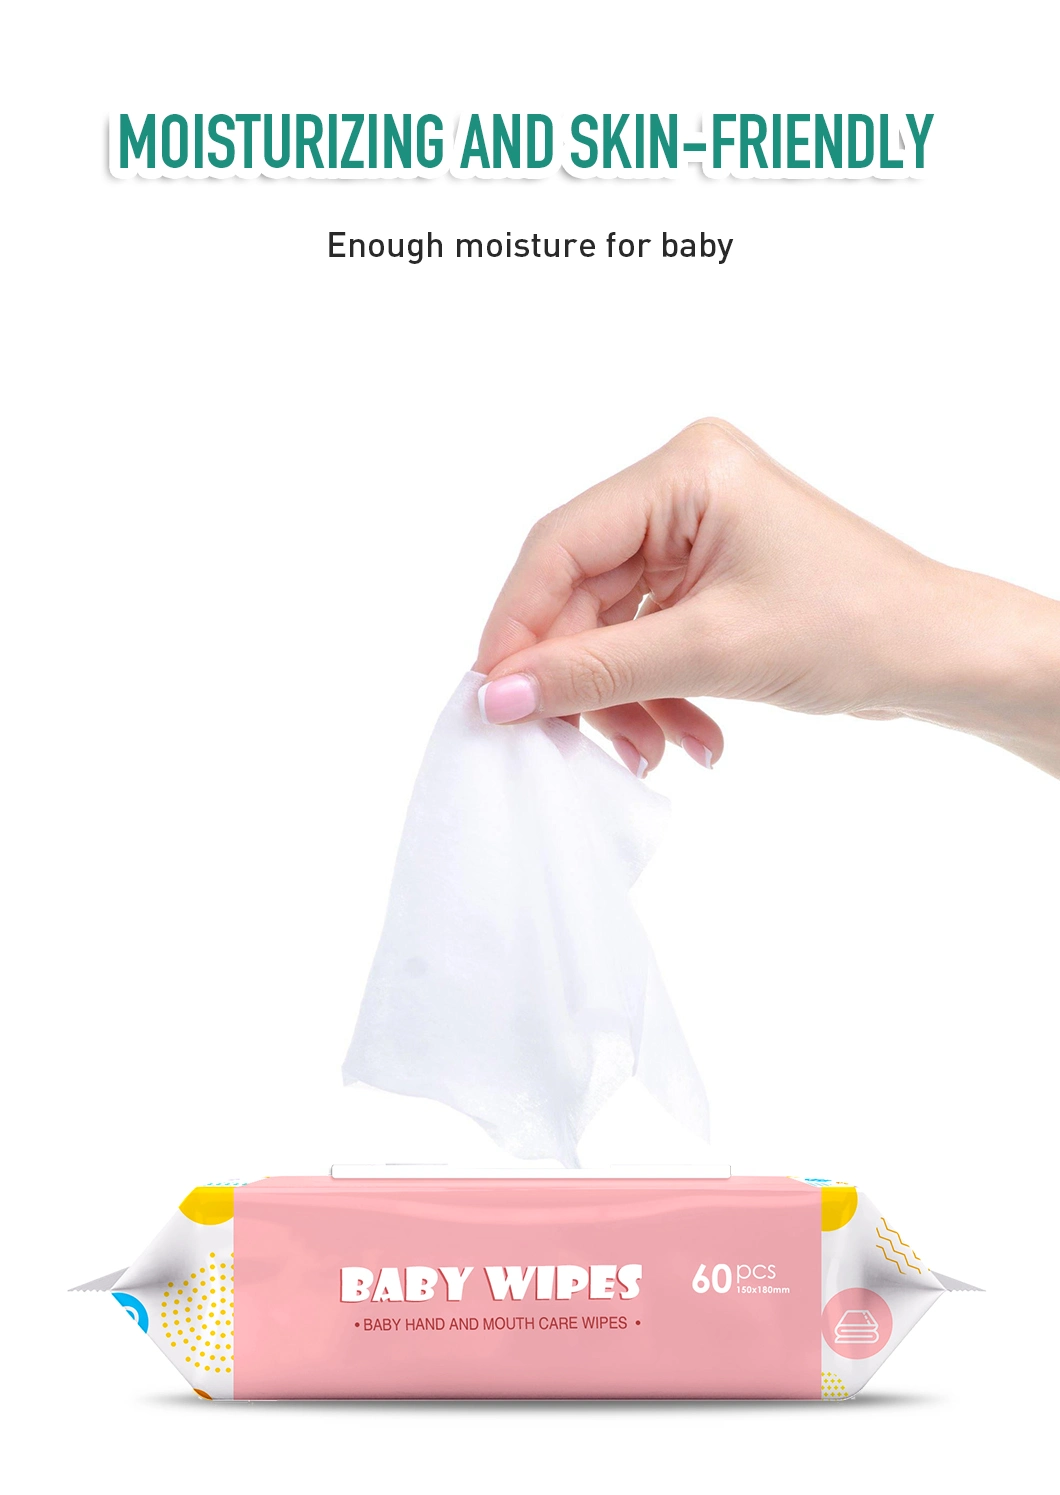 100% Plant Fiber RO Pure Water Baby Wet Wipes for Cleansing